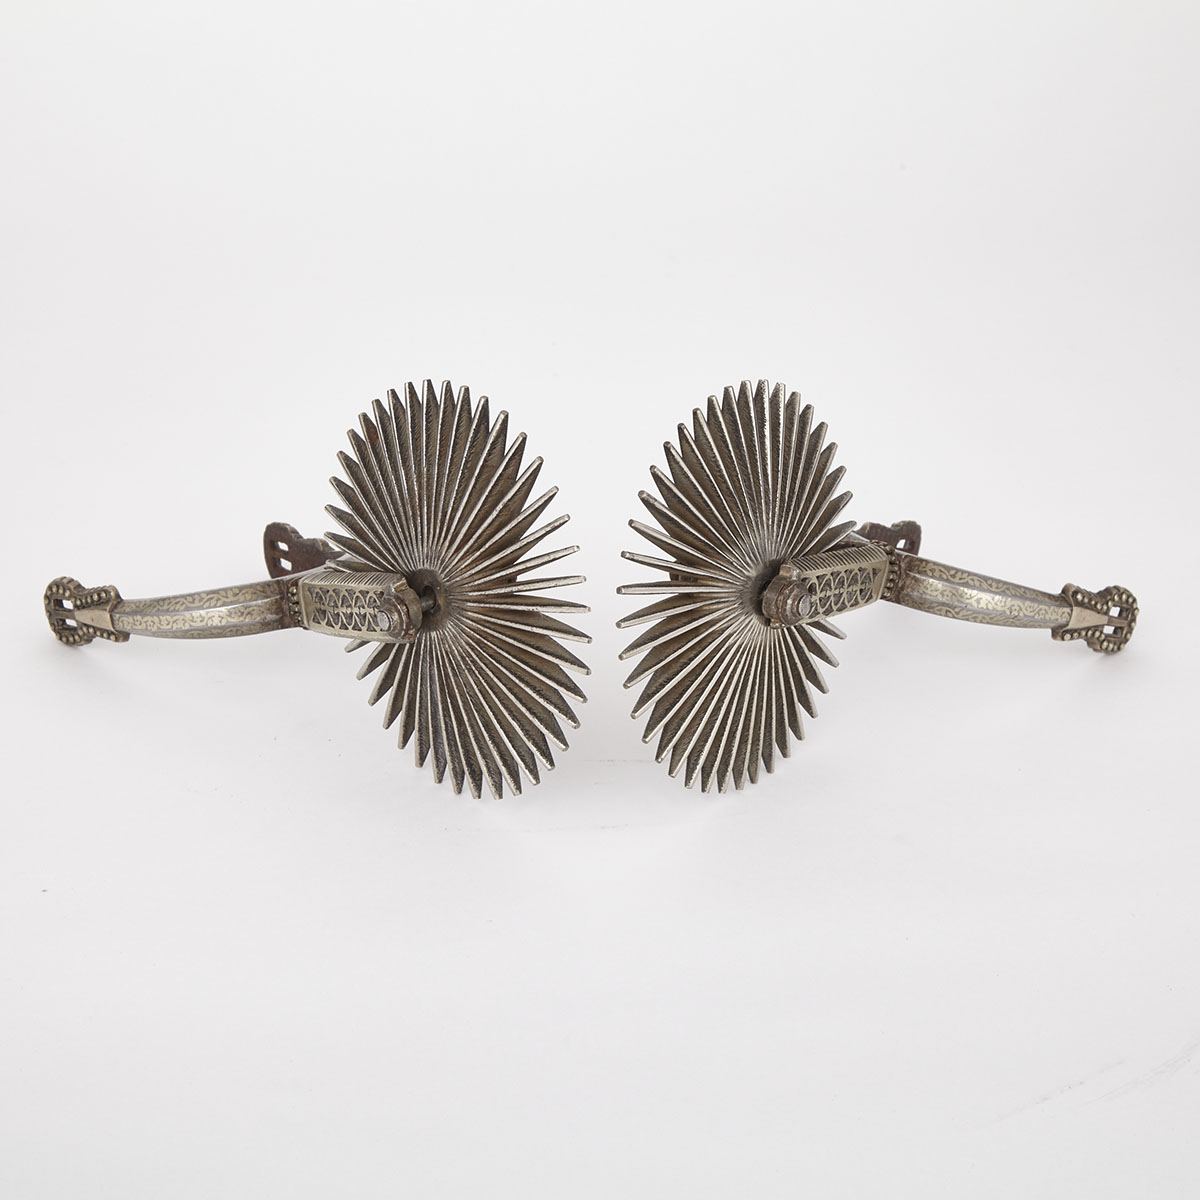 Fine Pair of Argentinean Pampas Polished Steel and Nickel Silver Gaucho Spurs, 19th century